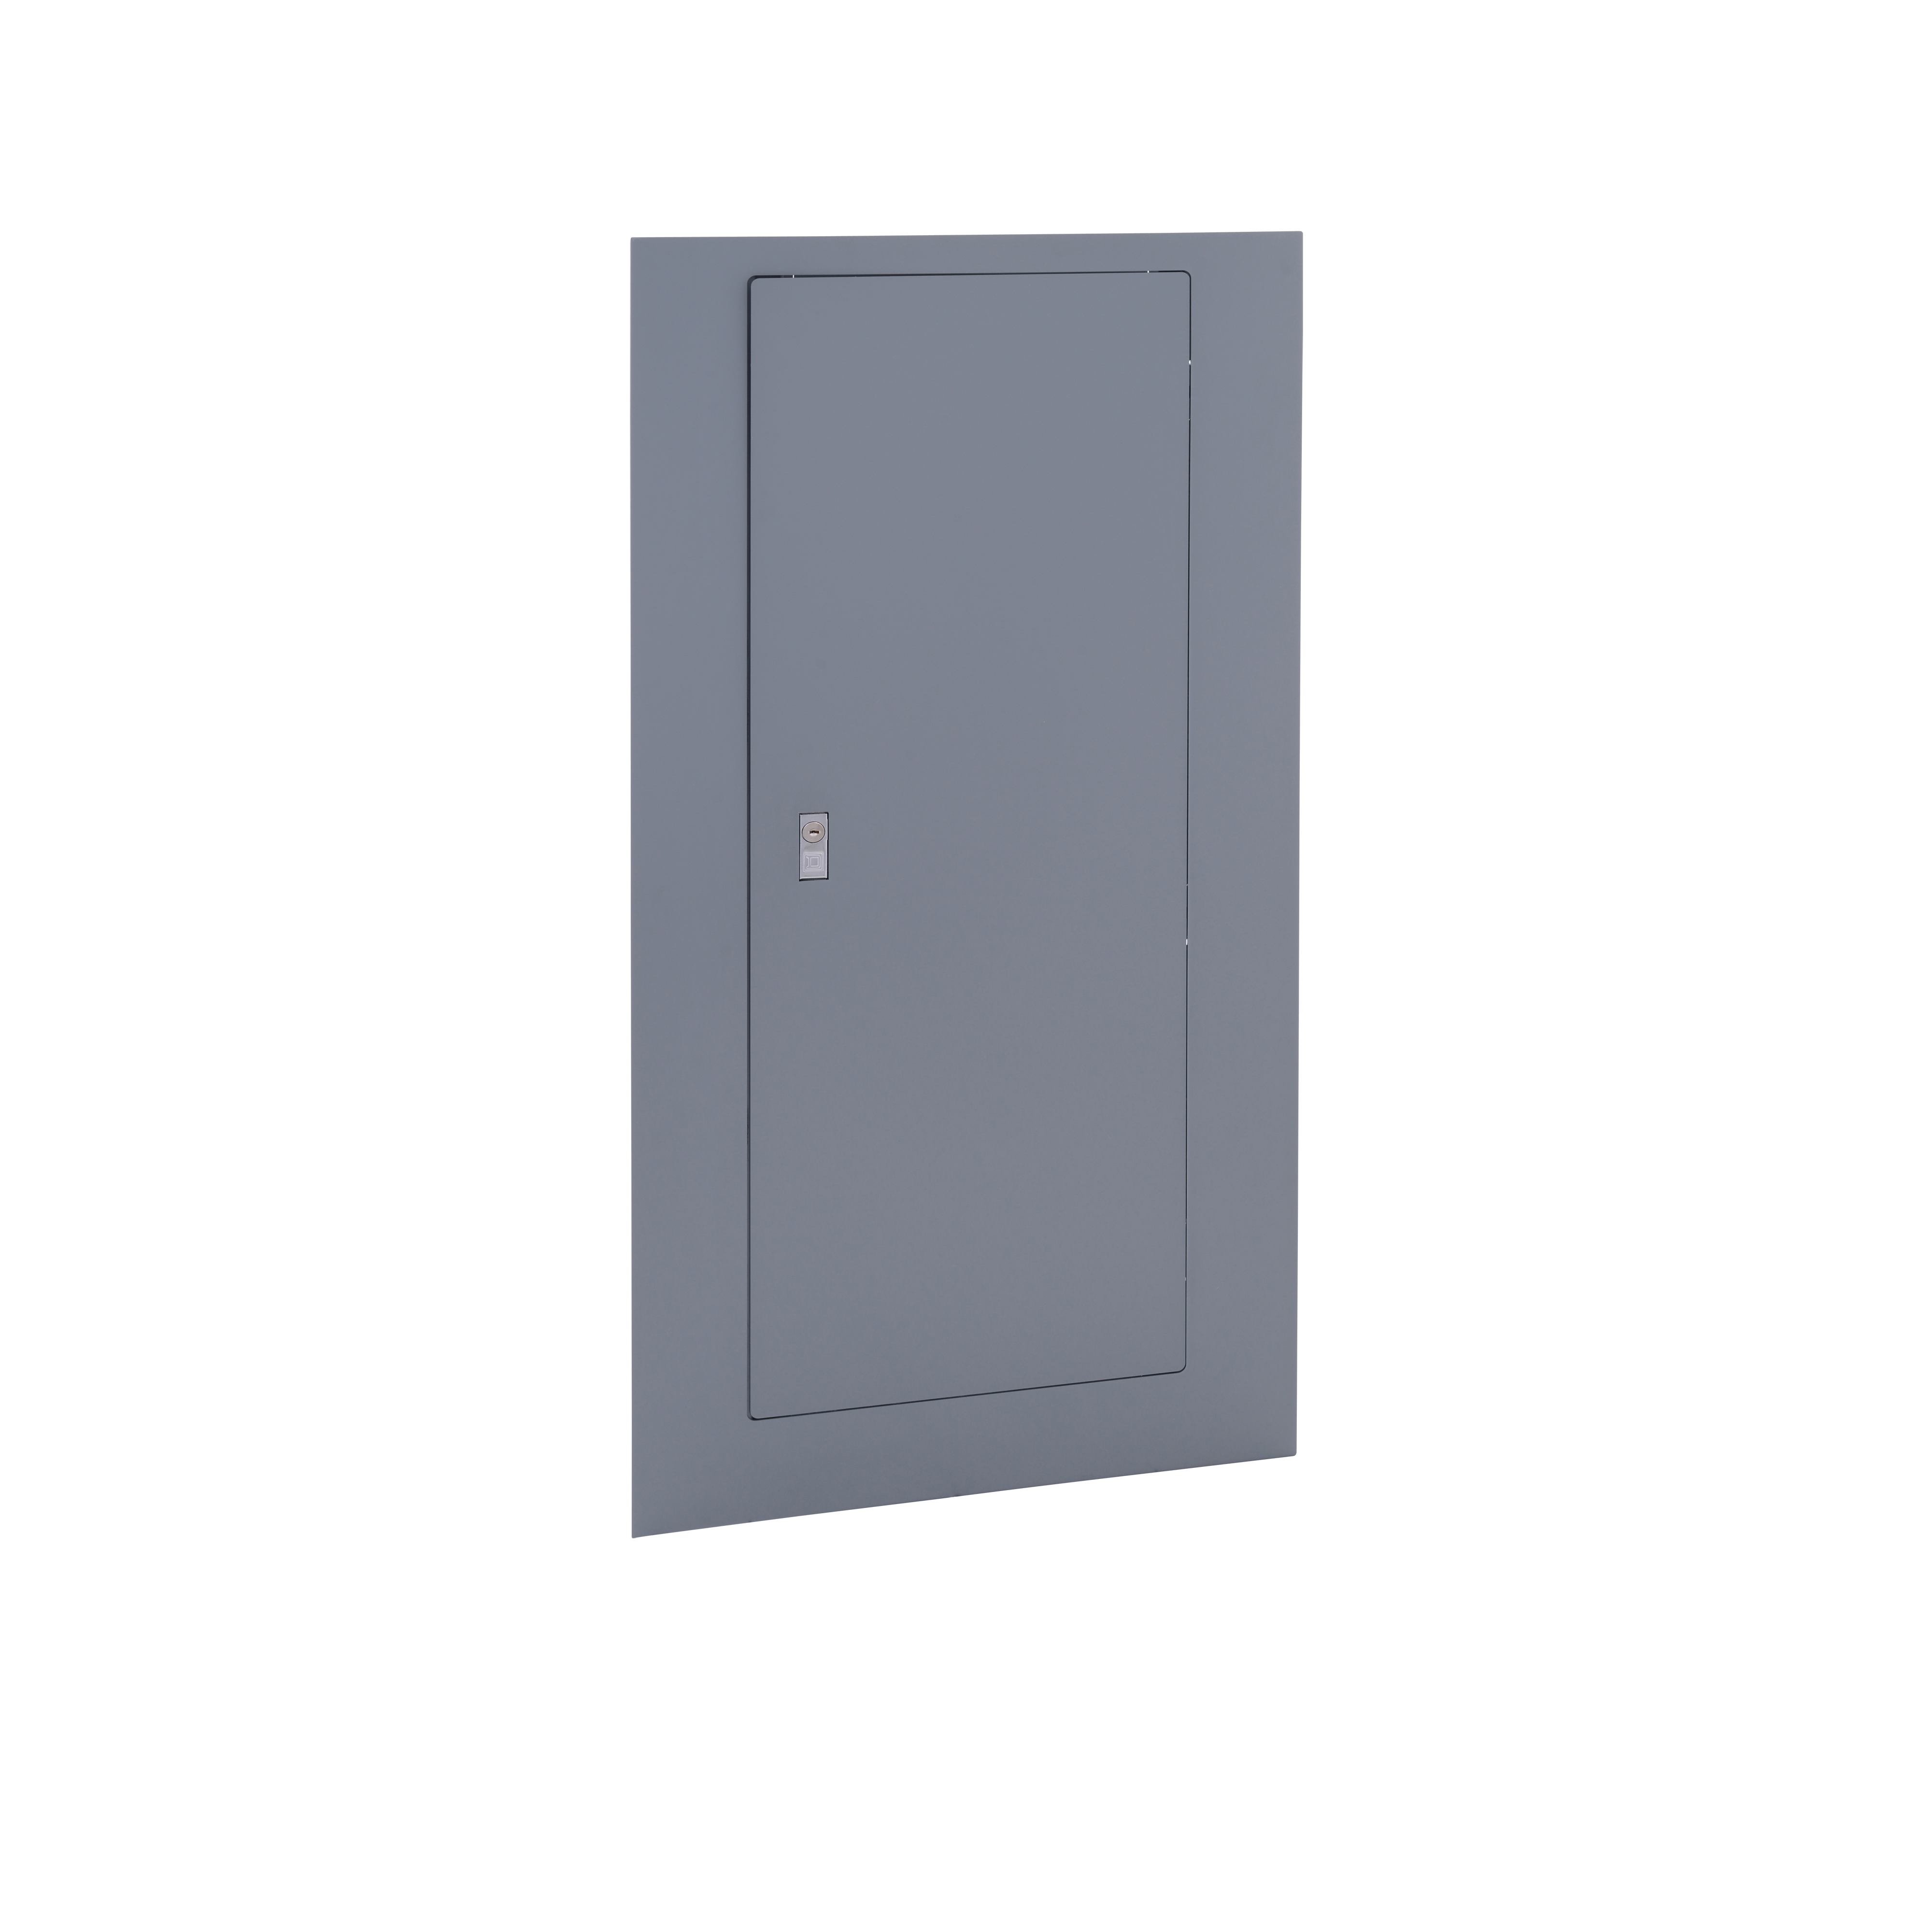 Enclosure Cover, NQNF, Type 1, Surface, G, 20x44in